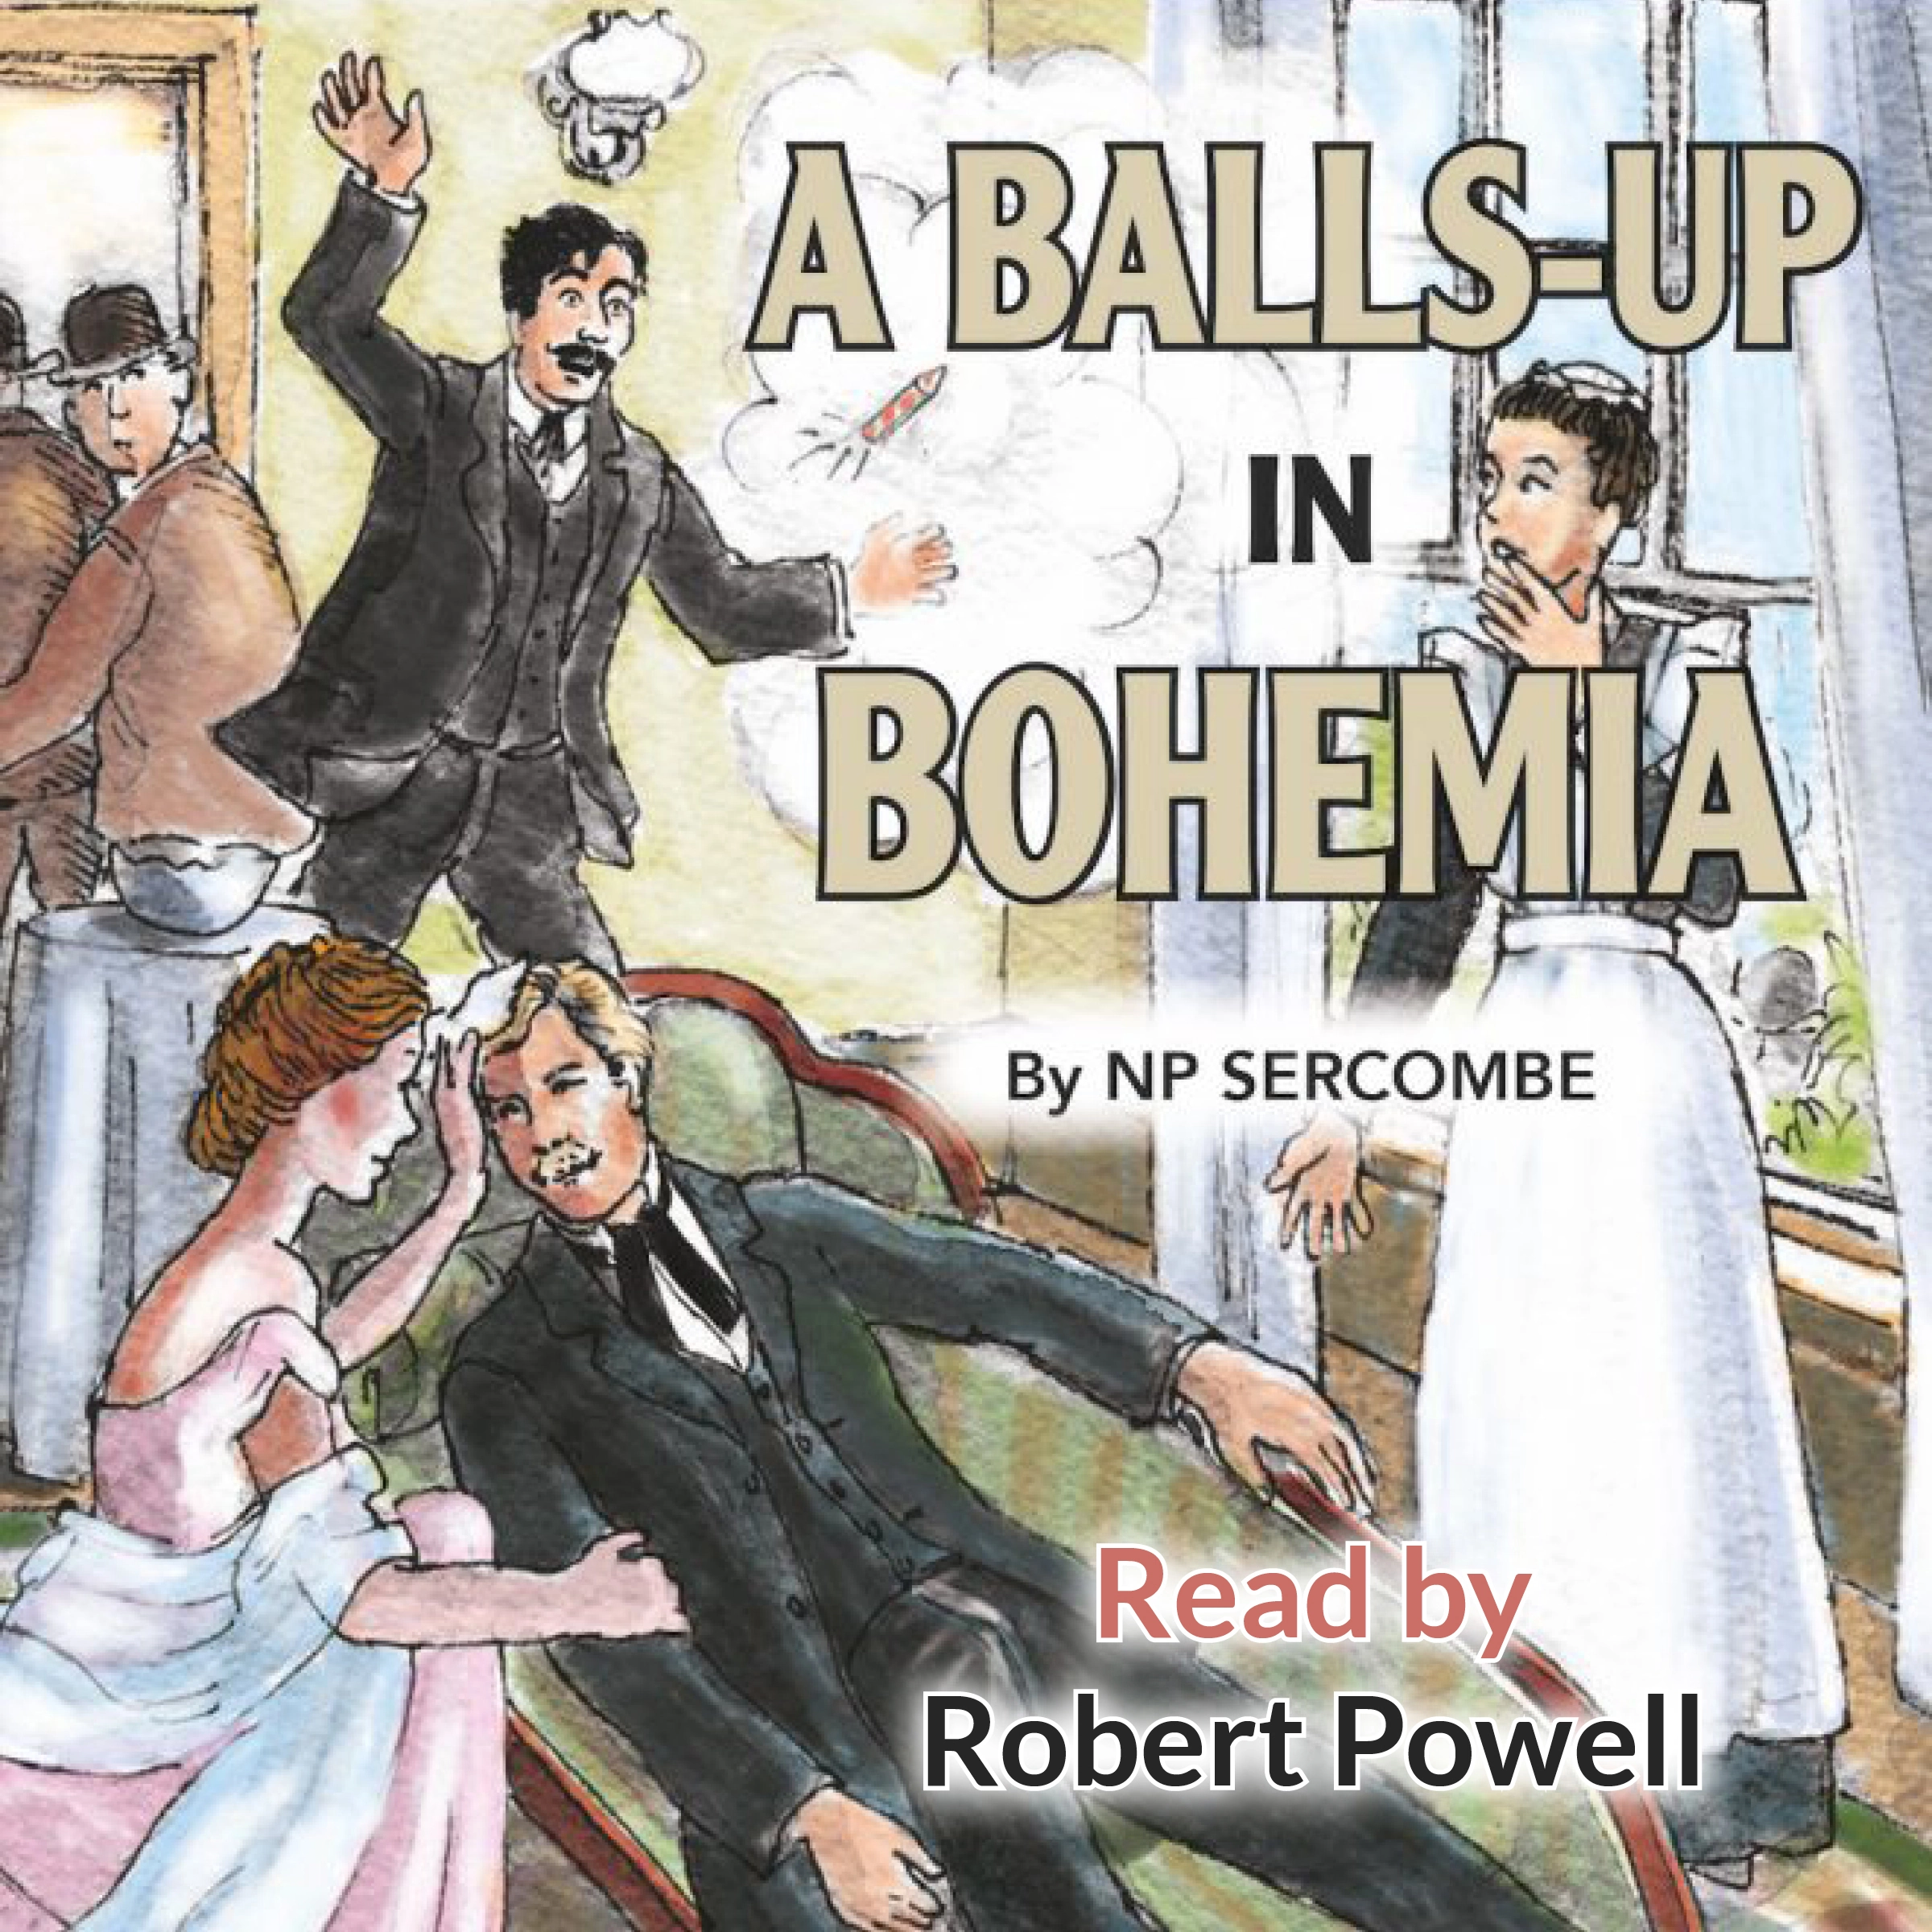 A Balls-up in Bohemia by N P Sercombe Audiobook